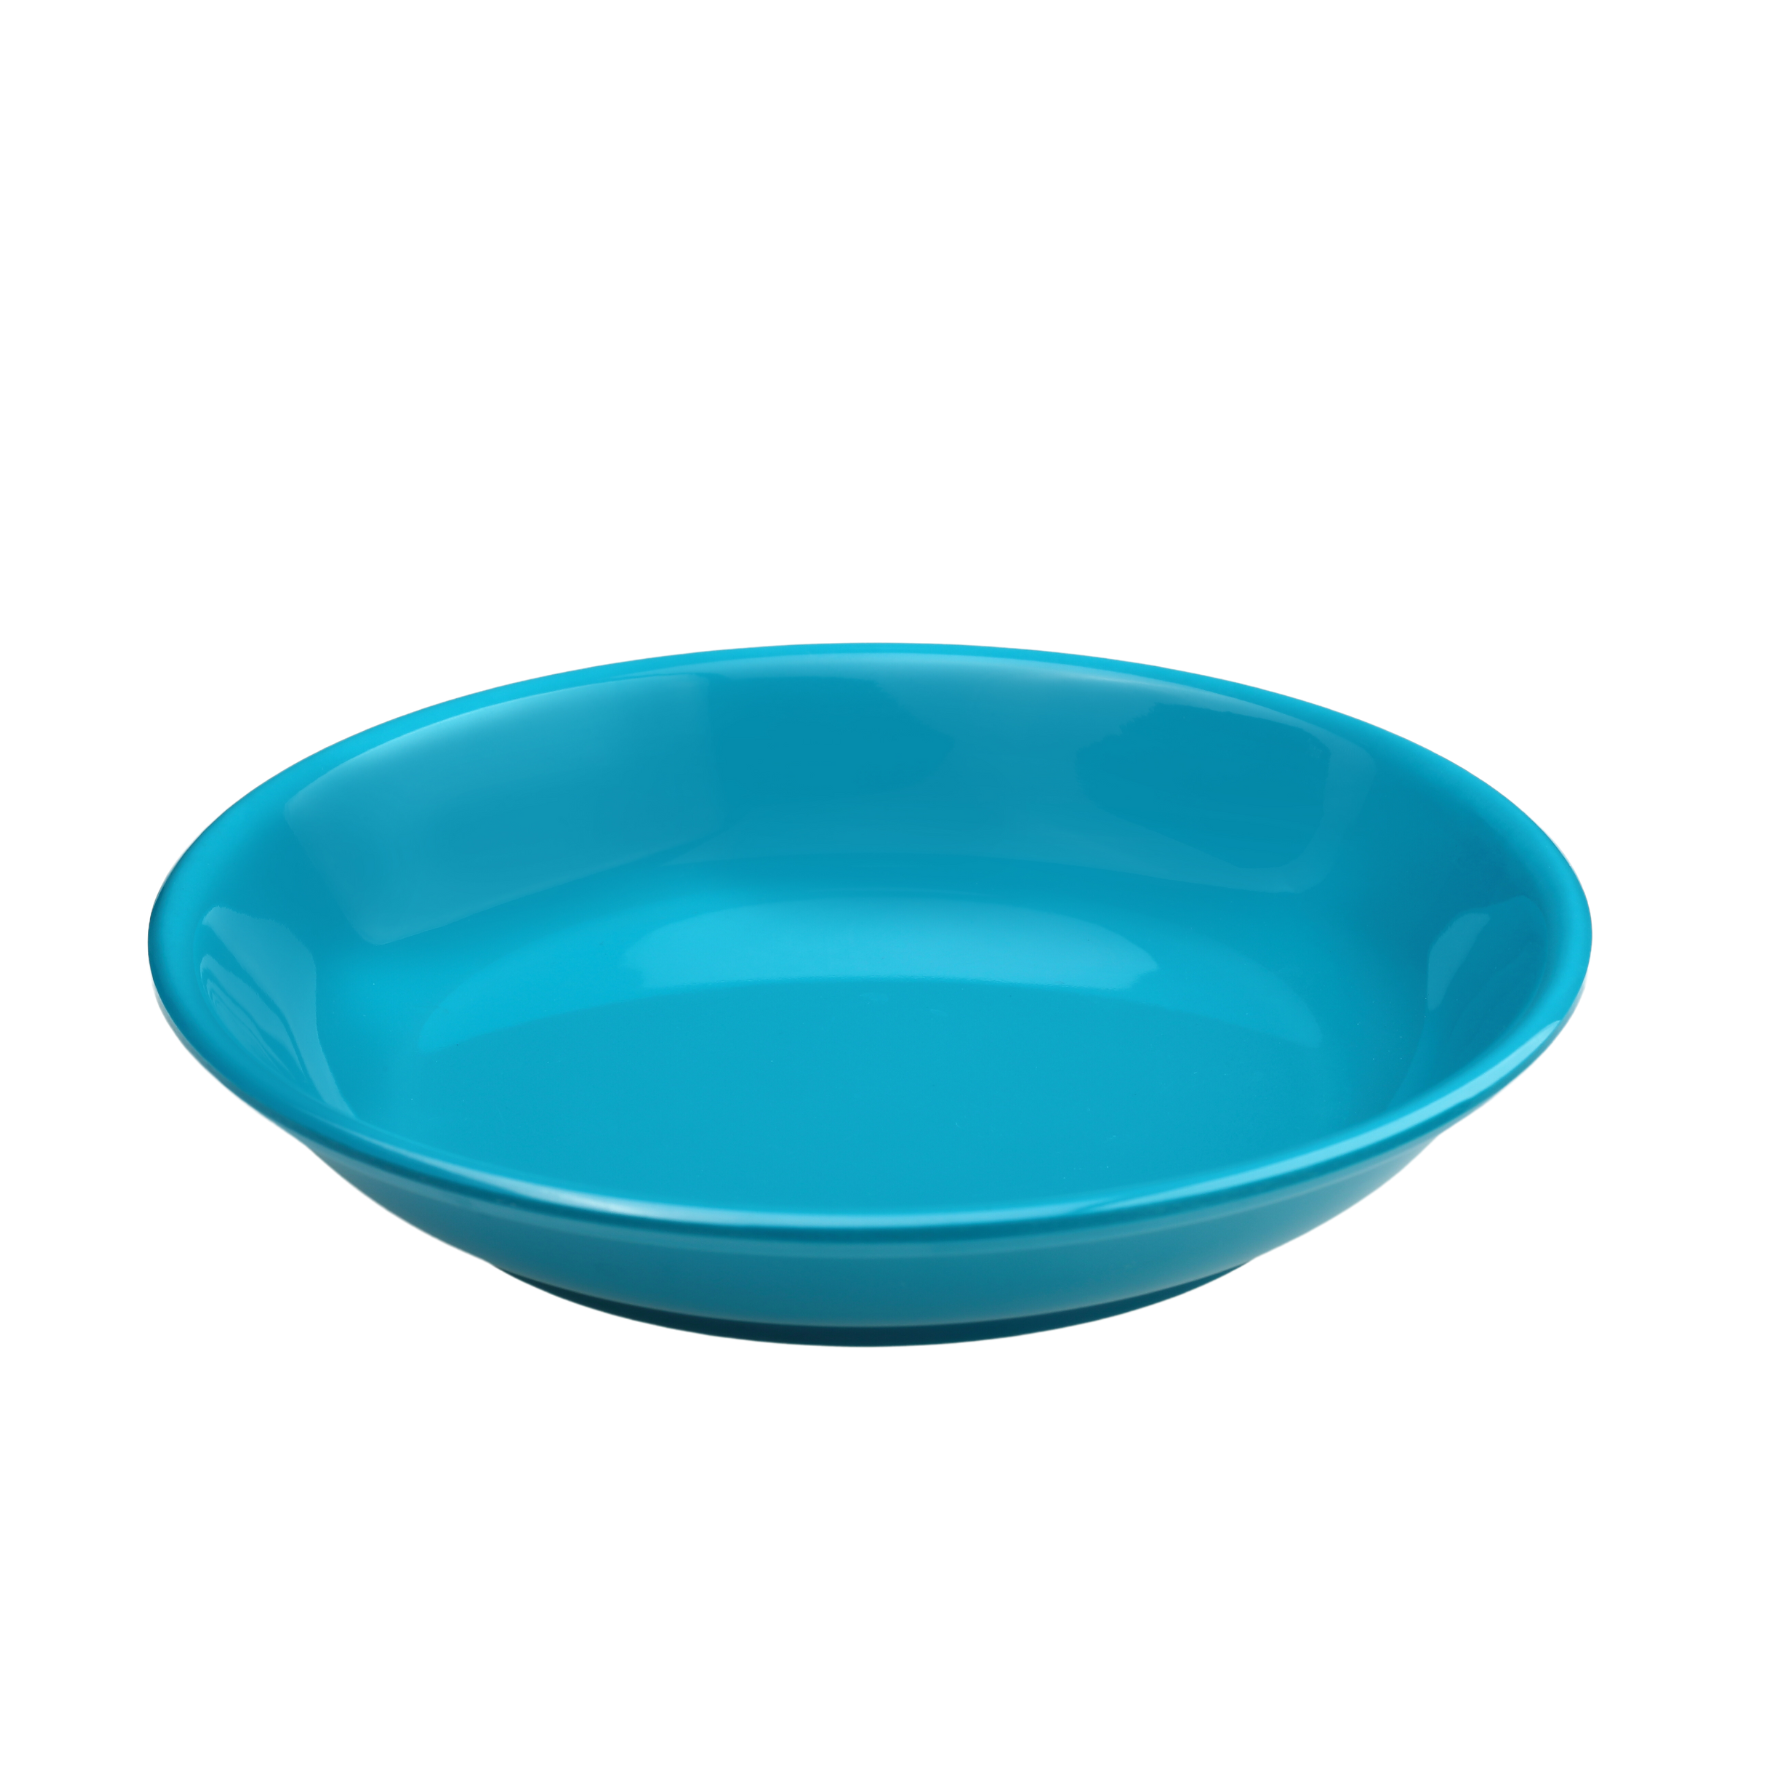 The Plate Story - Snack Plate 6.5” for Toddler - Sky Blue